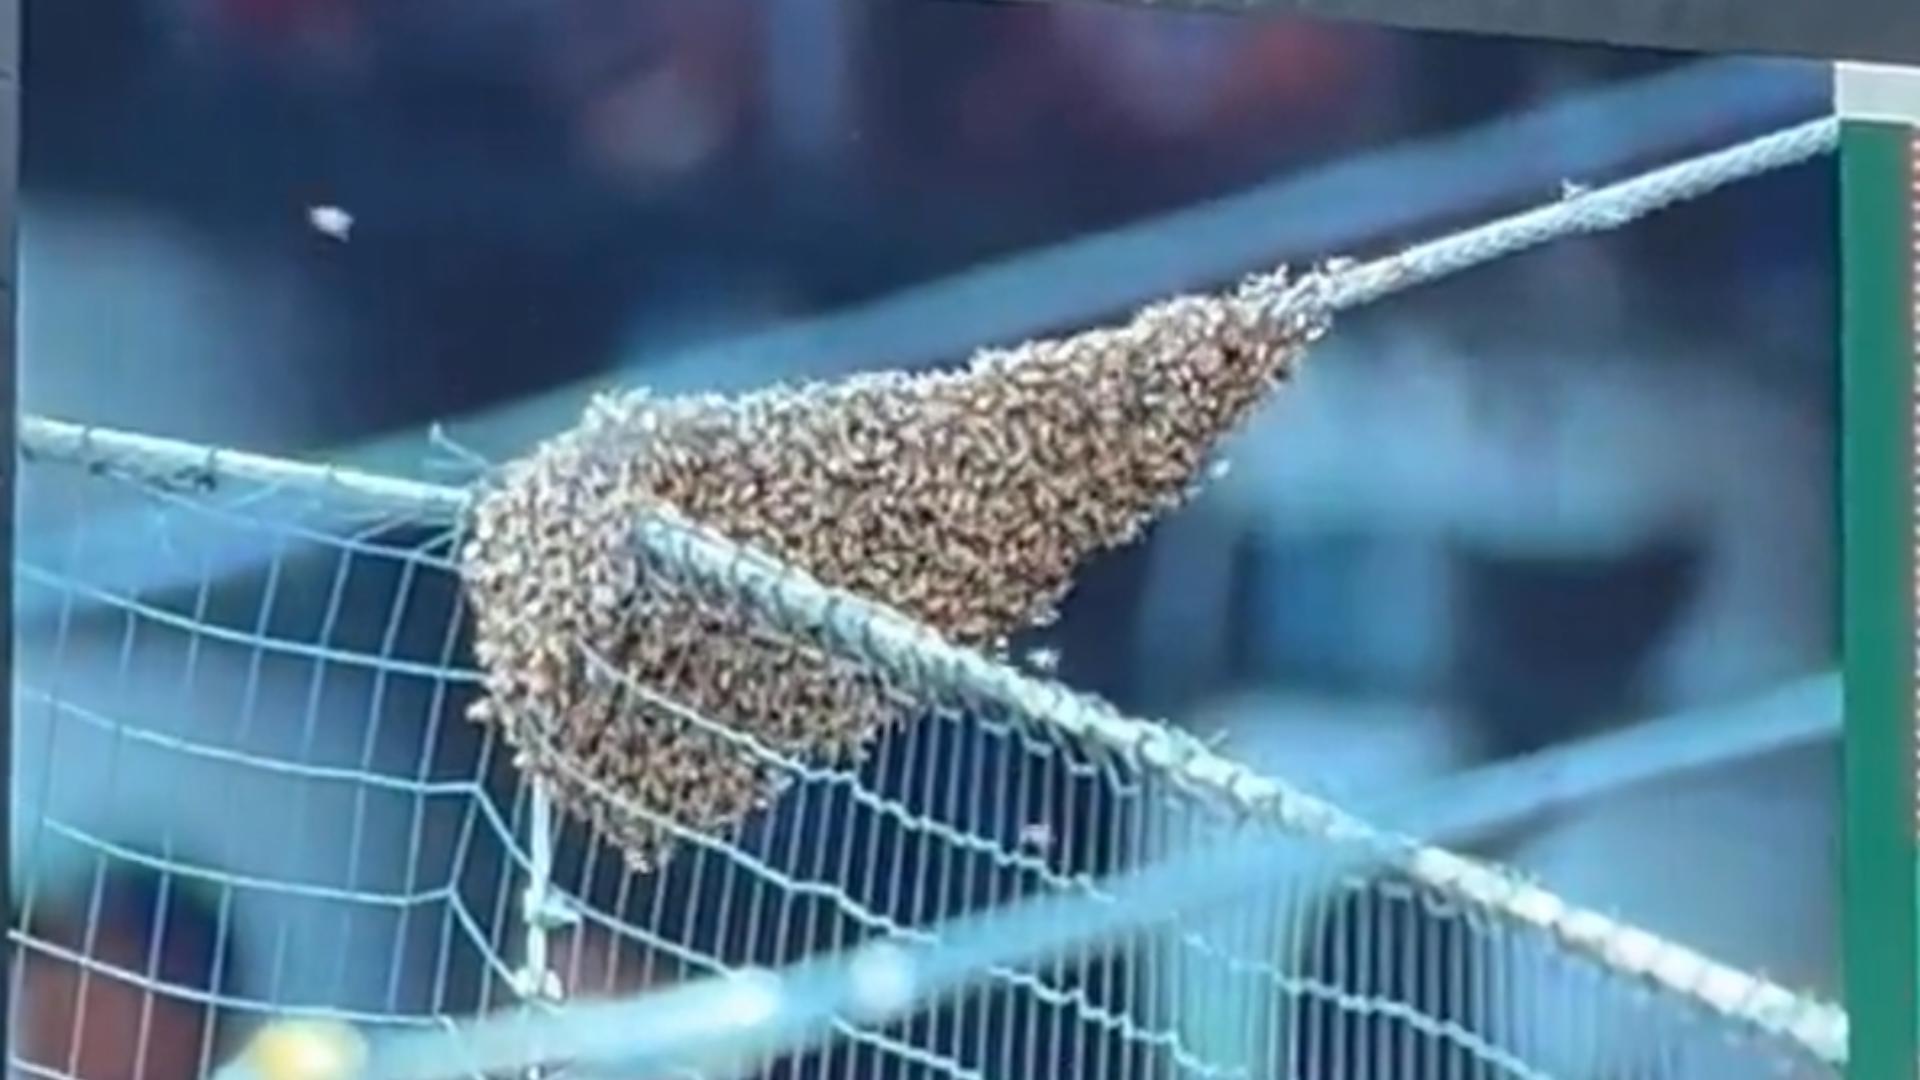 A colony of the insects was "forming on the protective netting behind home plate," officials said. Courtesy: Tyler Bouldin